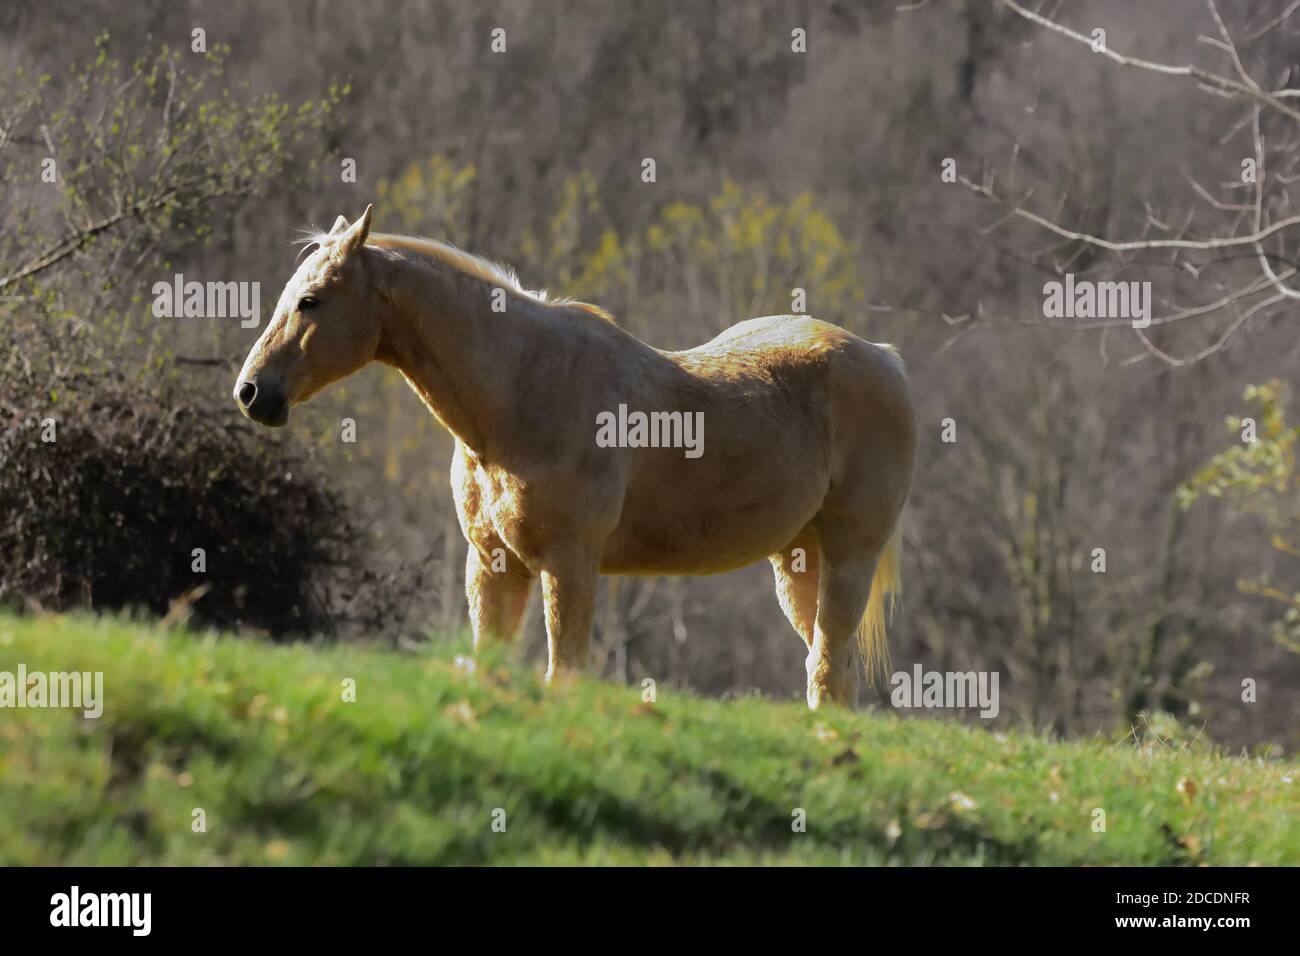 A free horse while grazing in a green meadow. Stock Photo